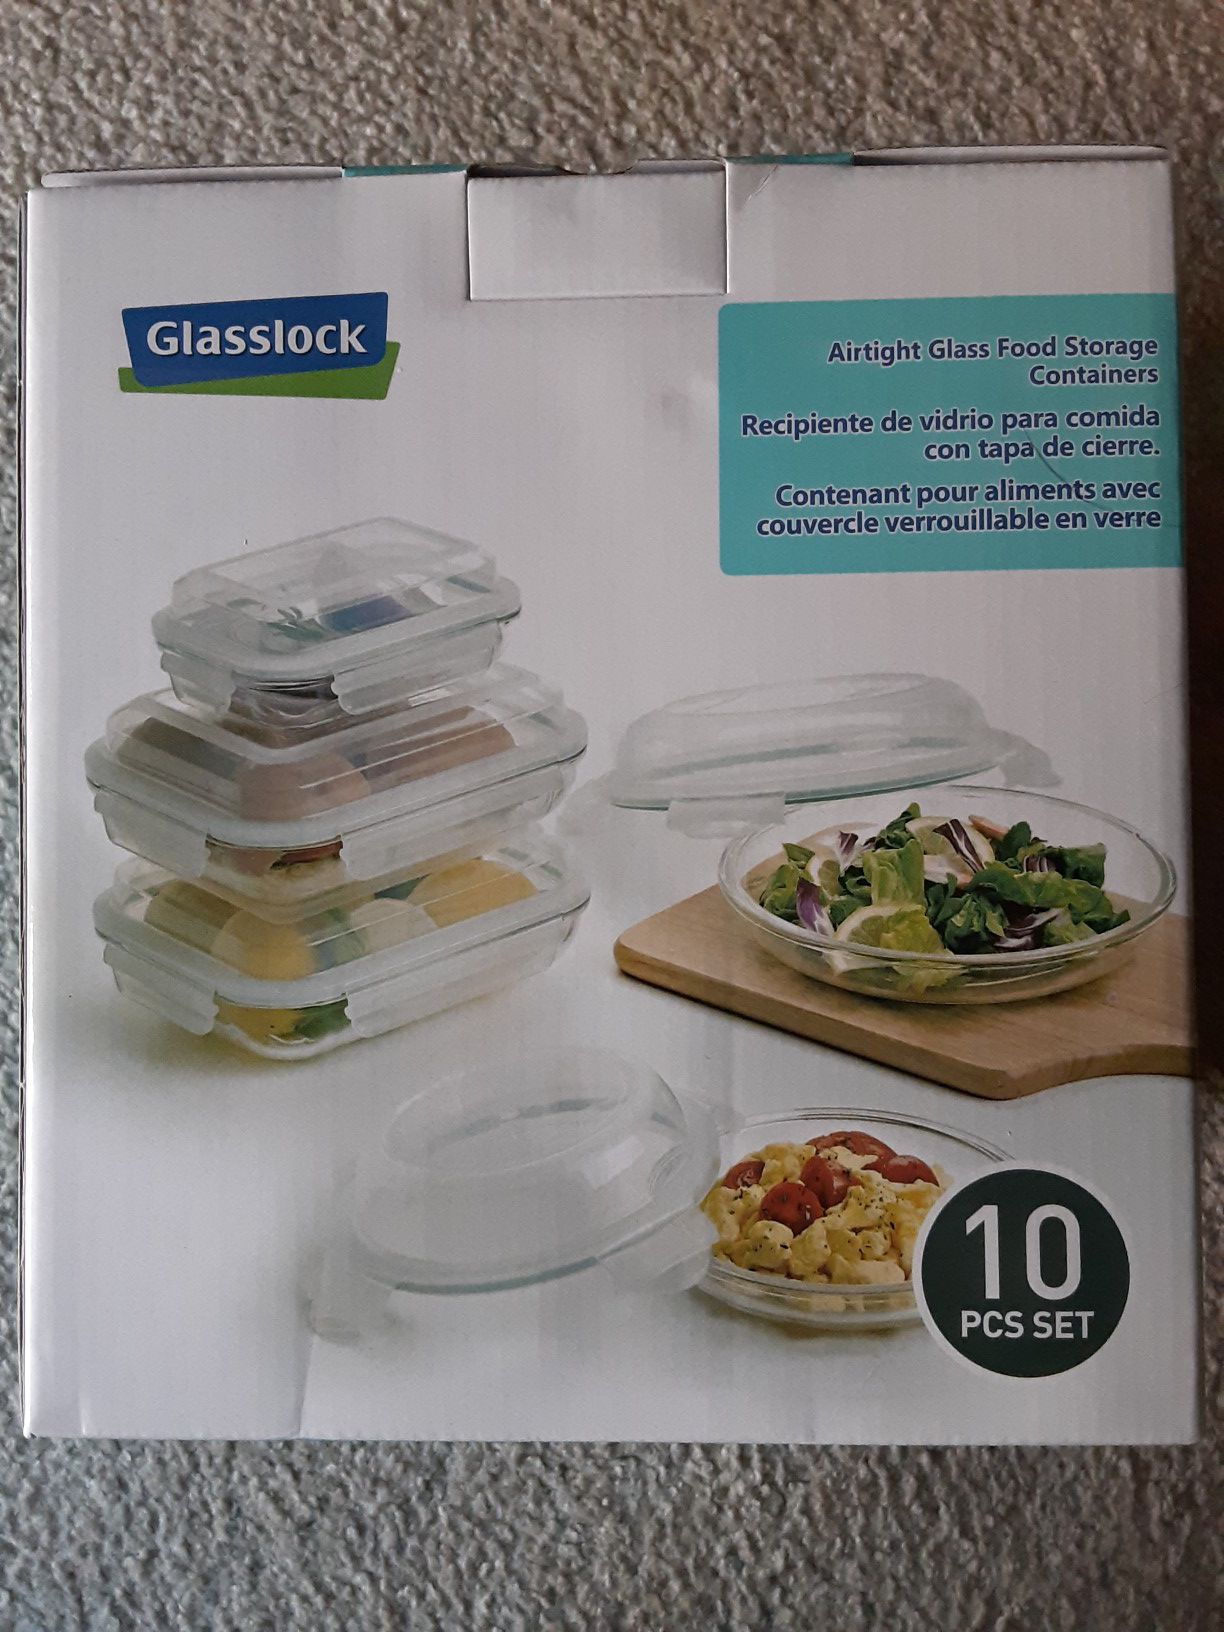 Glasslock Food Storage Containers